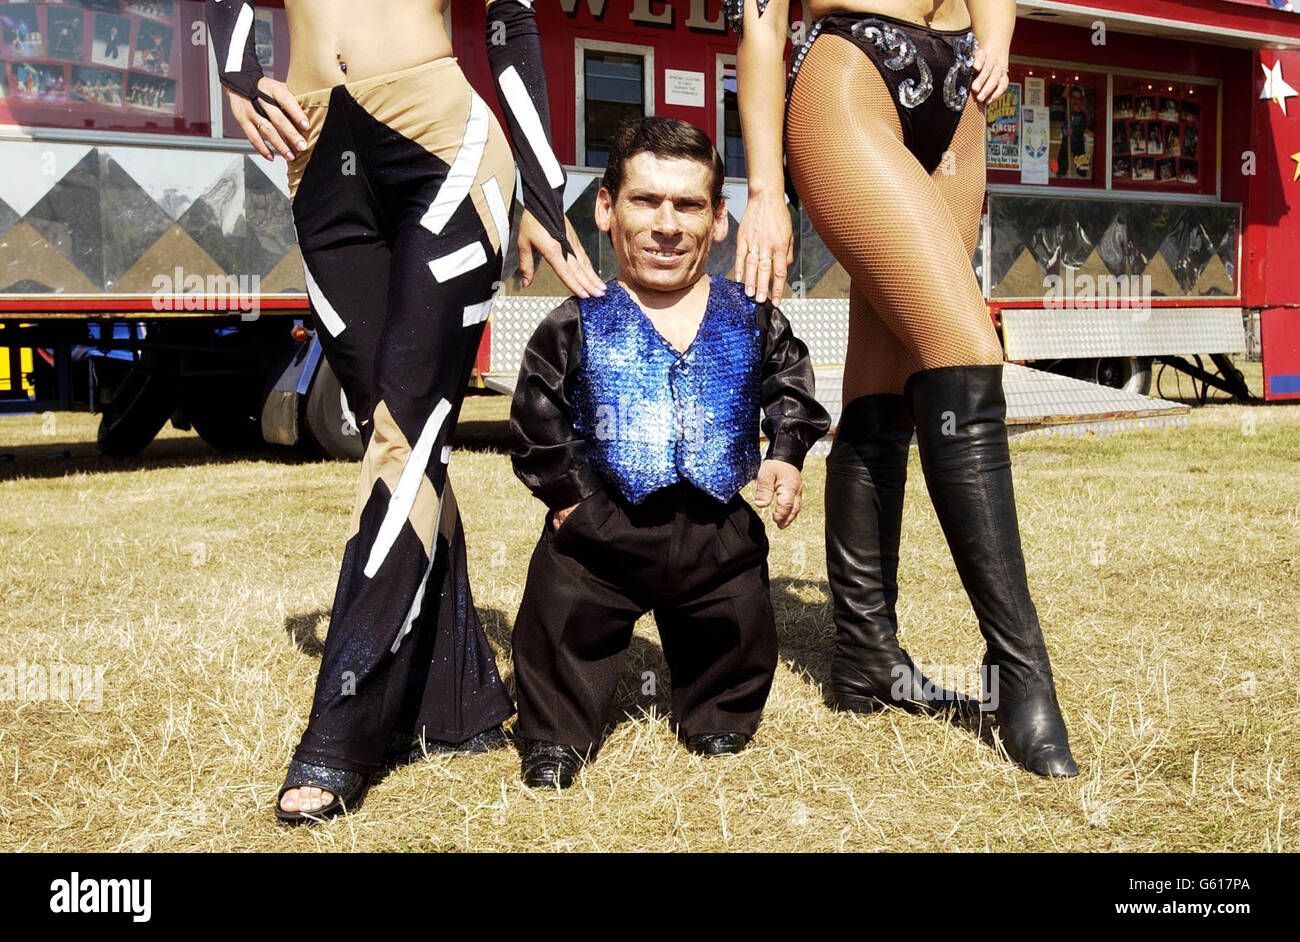 Pitchu, a circus entertainer with the Cottle and Austen Circus and thought to be the world's smallest man, stands with his friend Tito outside the big top on the day he has begun to search for a wife. *Hungarian Pitchu, 32, who is a knife thrower and acrobat at the Cottle and Austen Electric Circus presently in Portsmouth, has been going to bars and discos hoping to find love. At a photocall Pitchu admitted to being shy but said his perfect woman should be a least 5 feet tall. Stock Photo